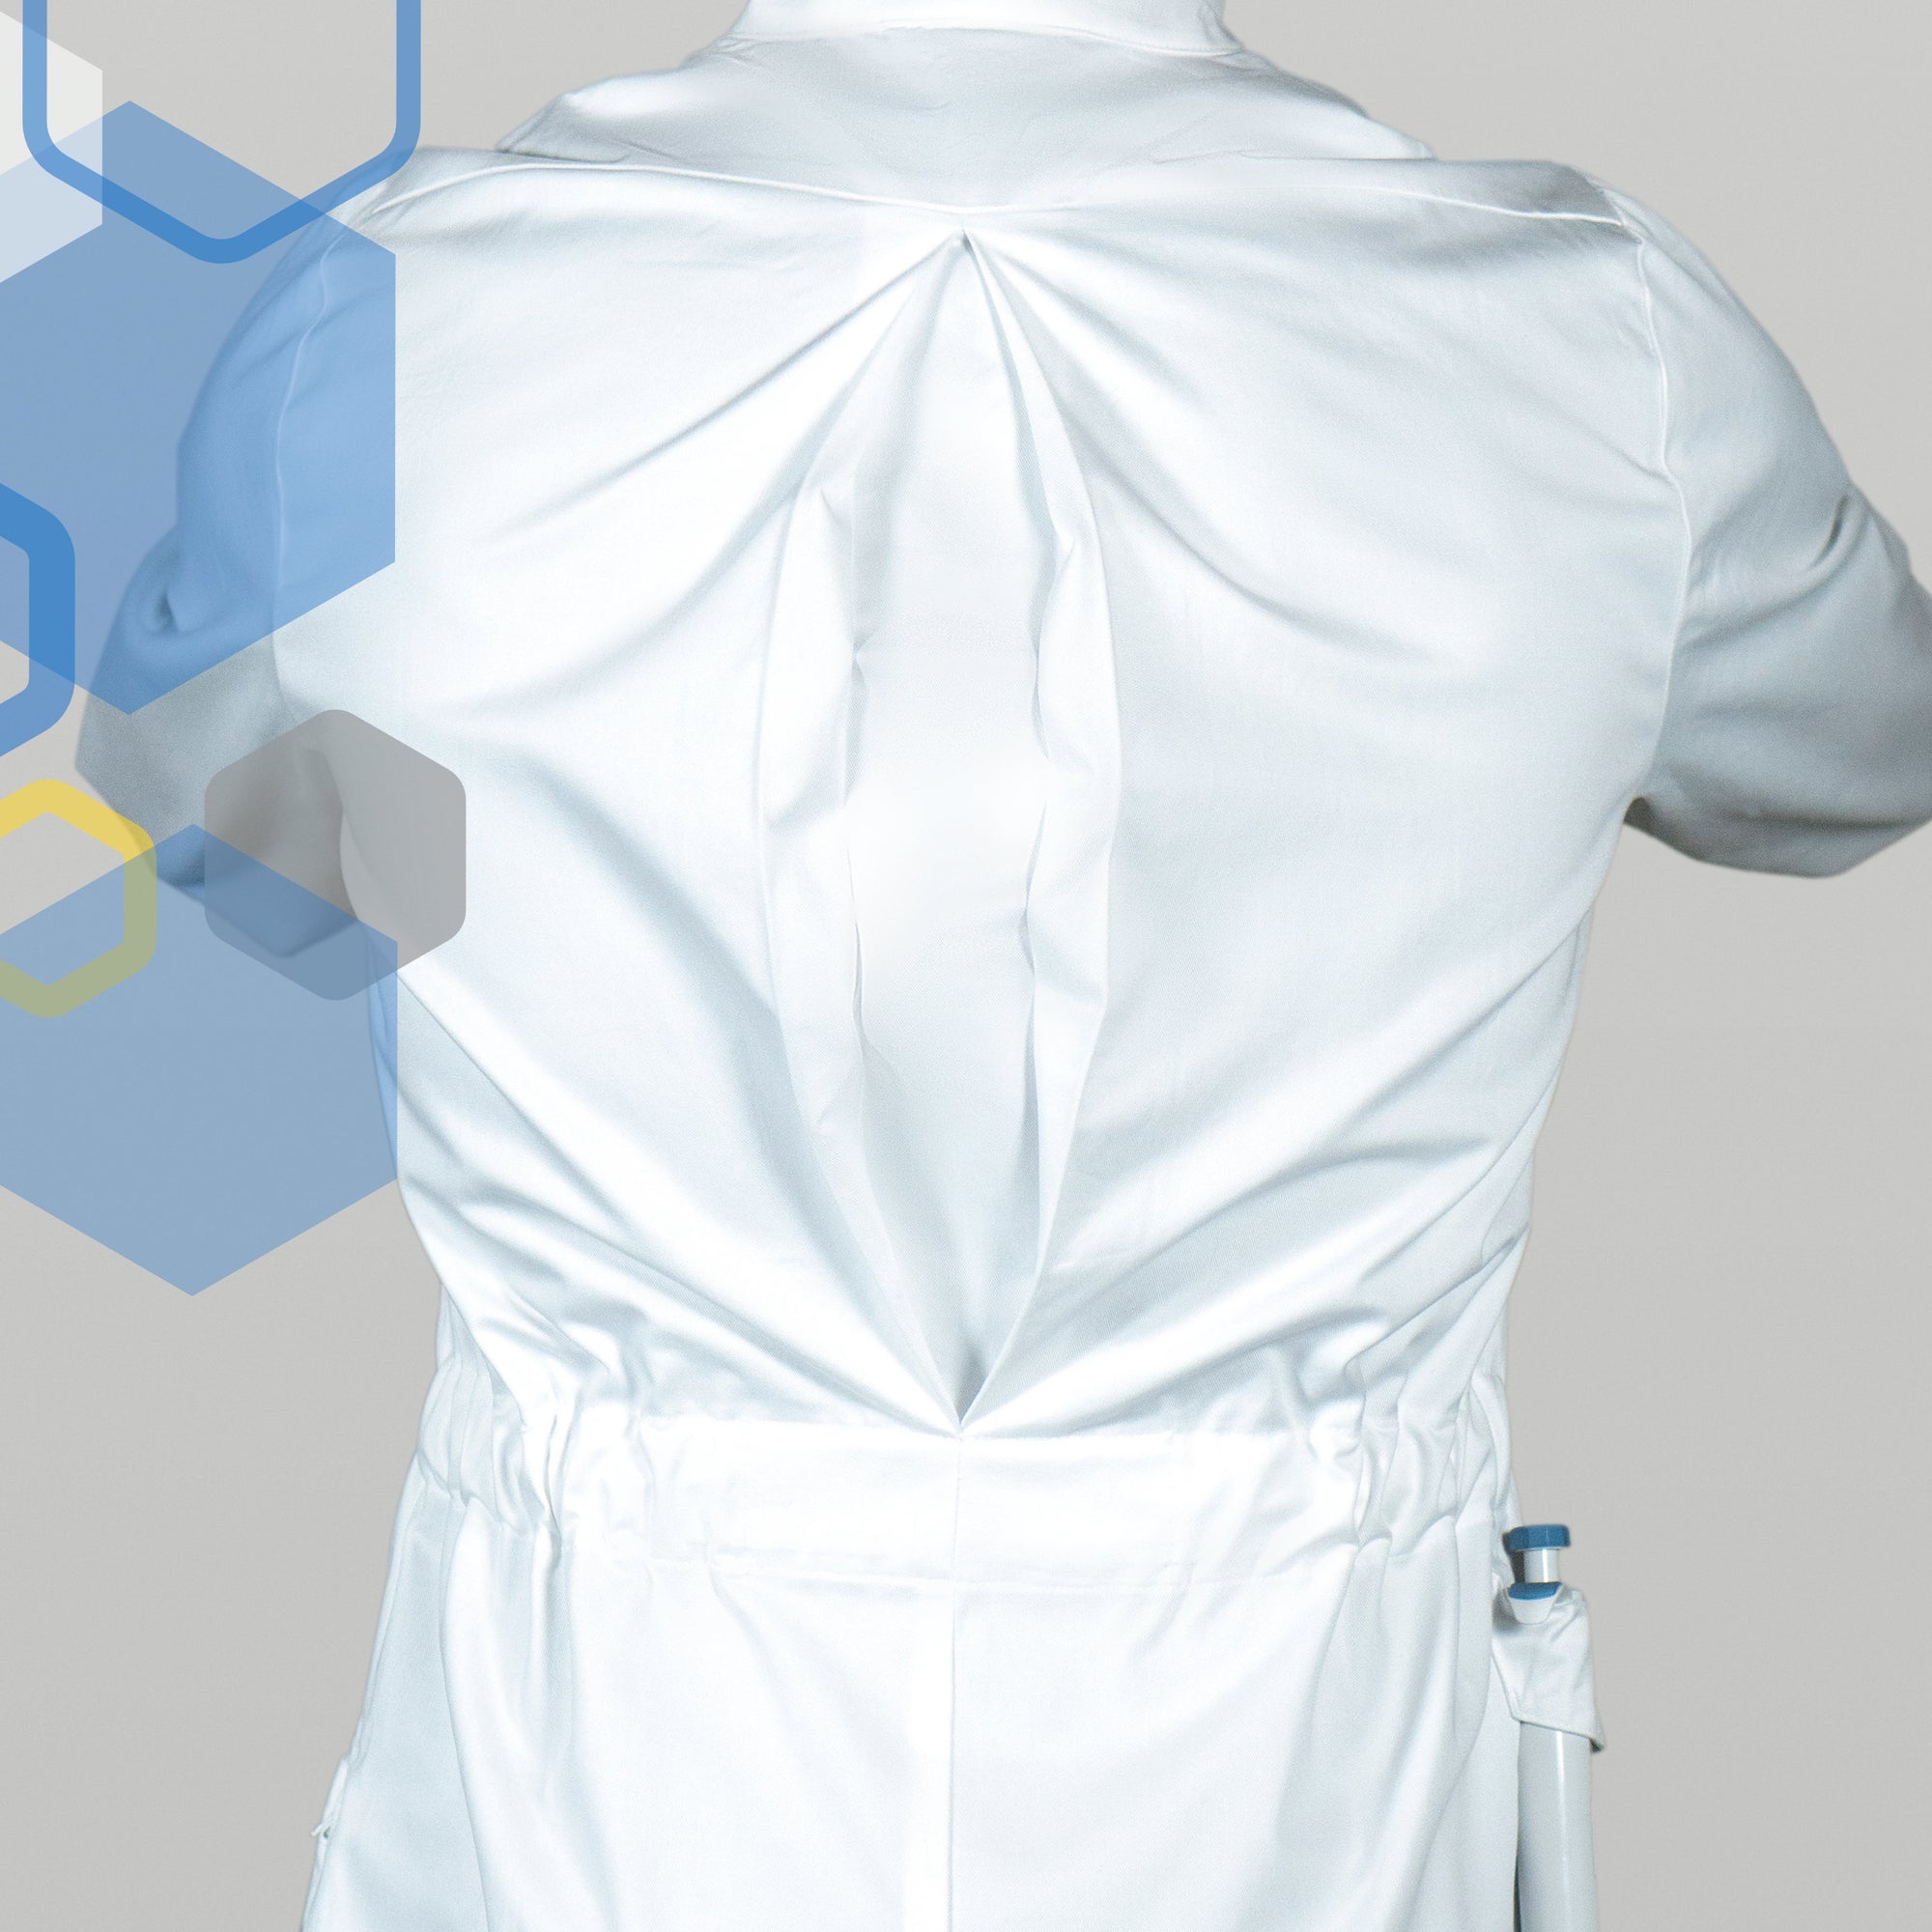 men's chemistry lab coat - back made of 100% cotton, with back pleat for extra stretch